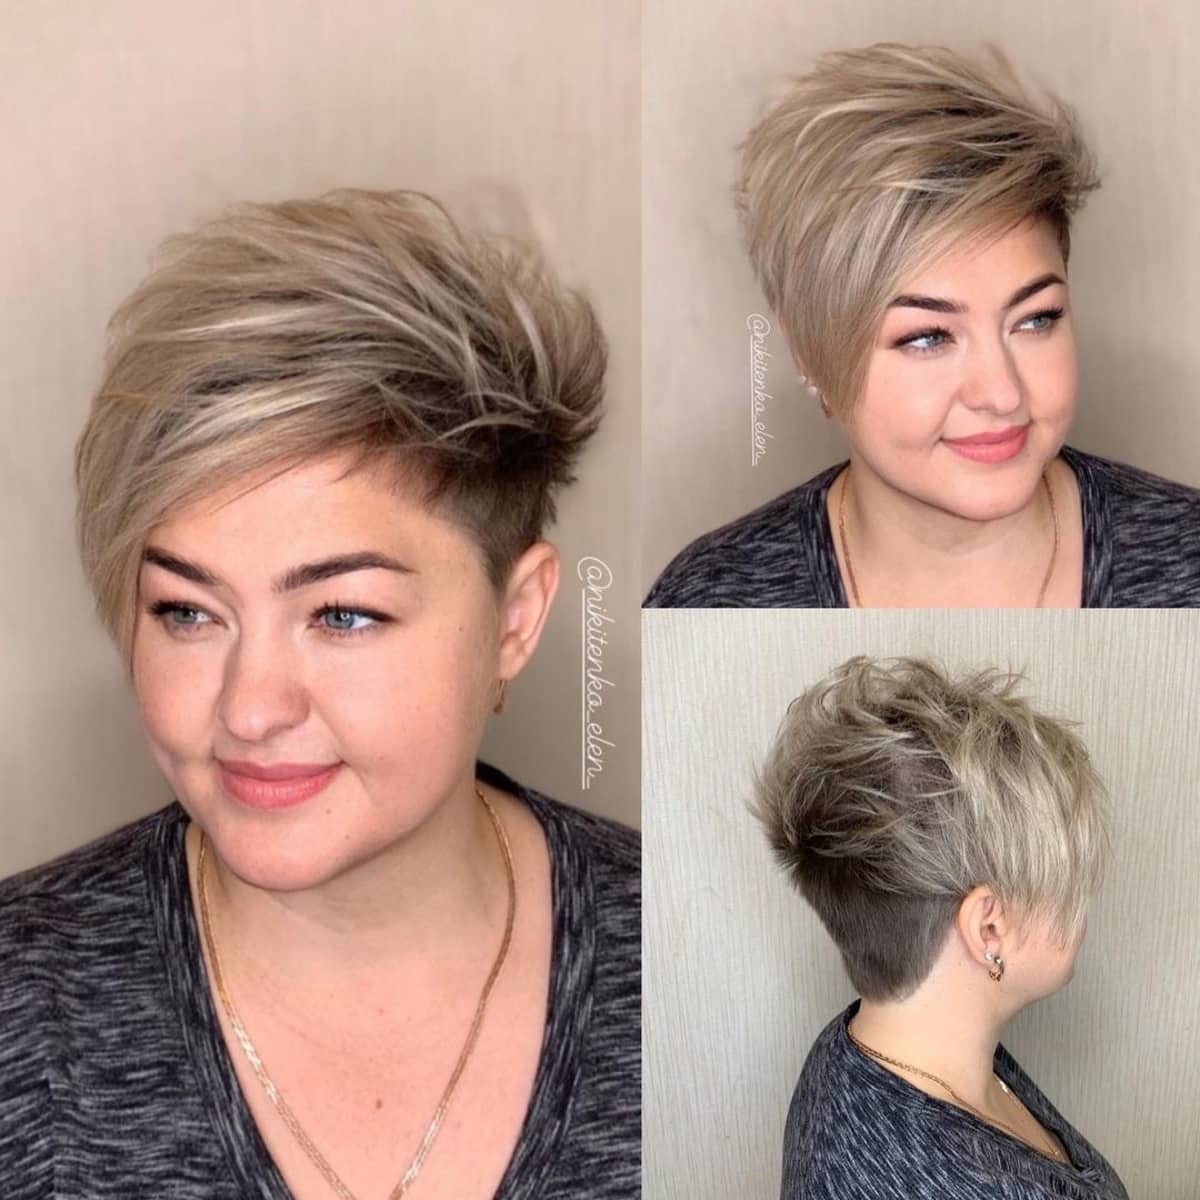 Pixie with Side-Swept Bangs Hairstyle